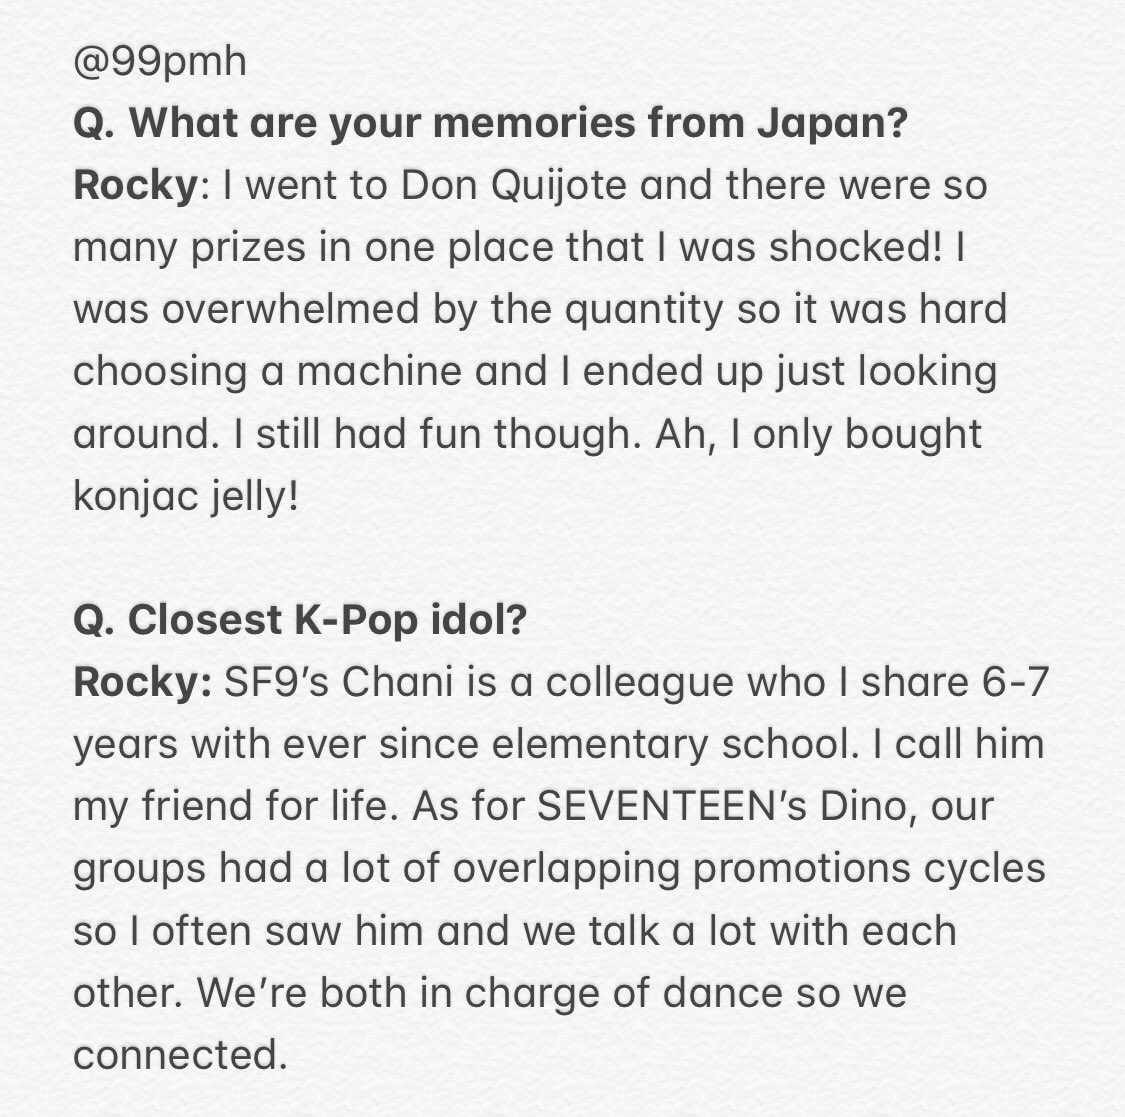 astro interview for anan. minhyuk mentioned chan in his “closest kpop idol” answer. ꒰  #라키  #디노  #세븐틴  #아스트로 ꒱translation by 99pmh https://twitter.com/99pmh/status/1034790017120395265?s=21